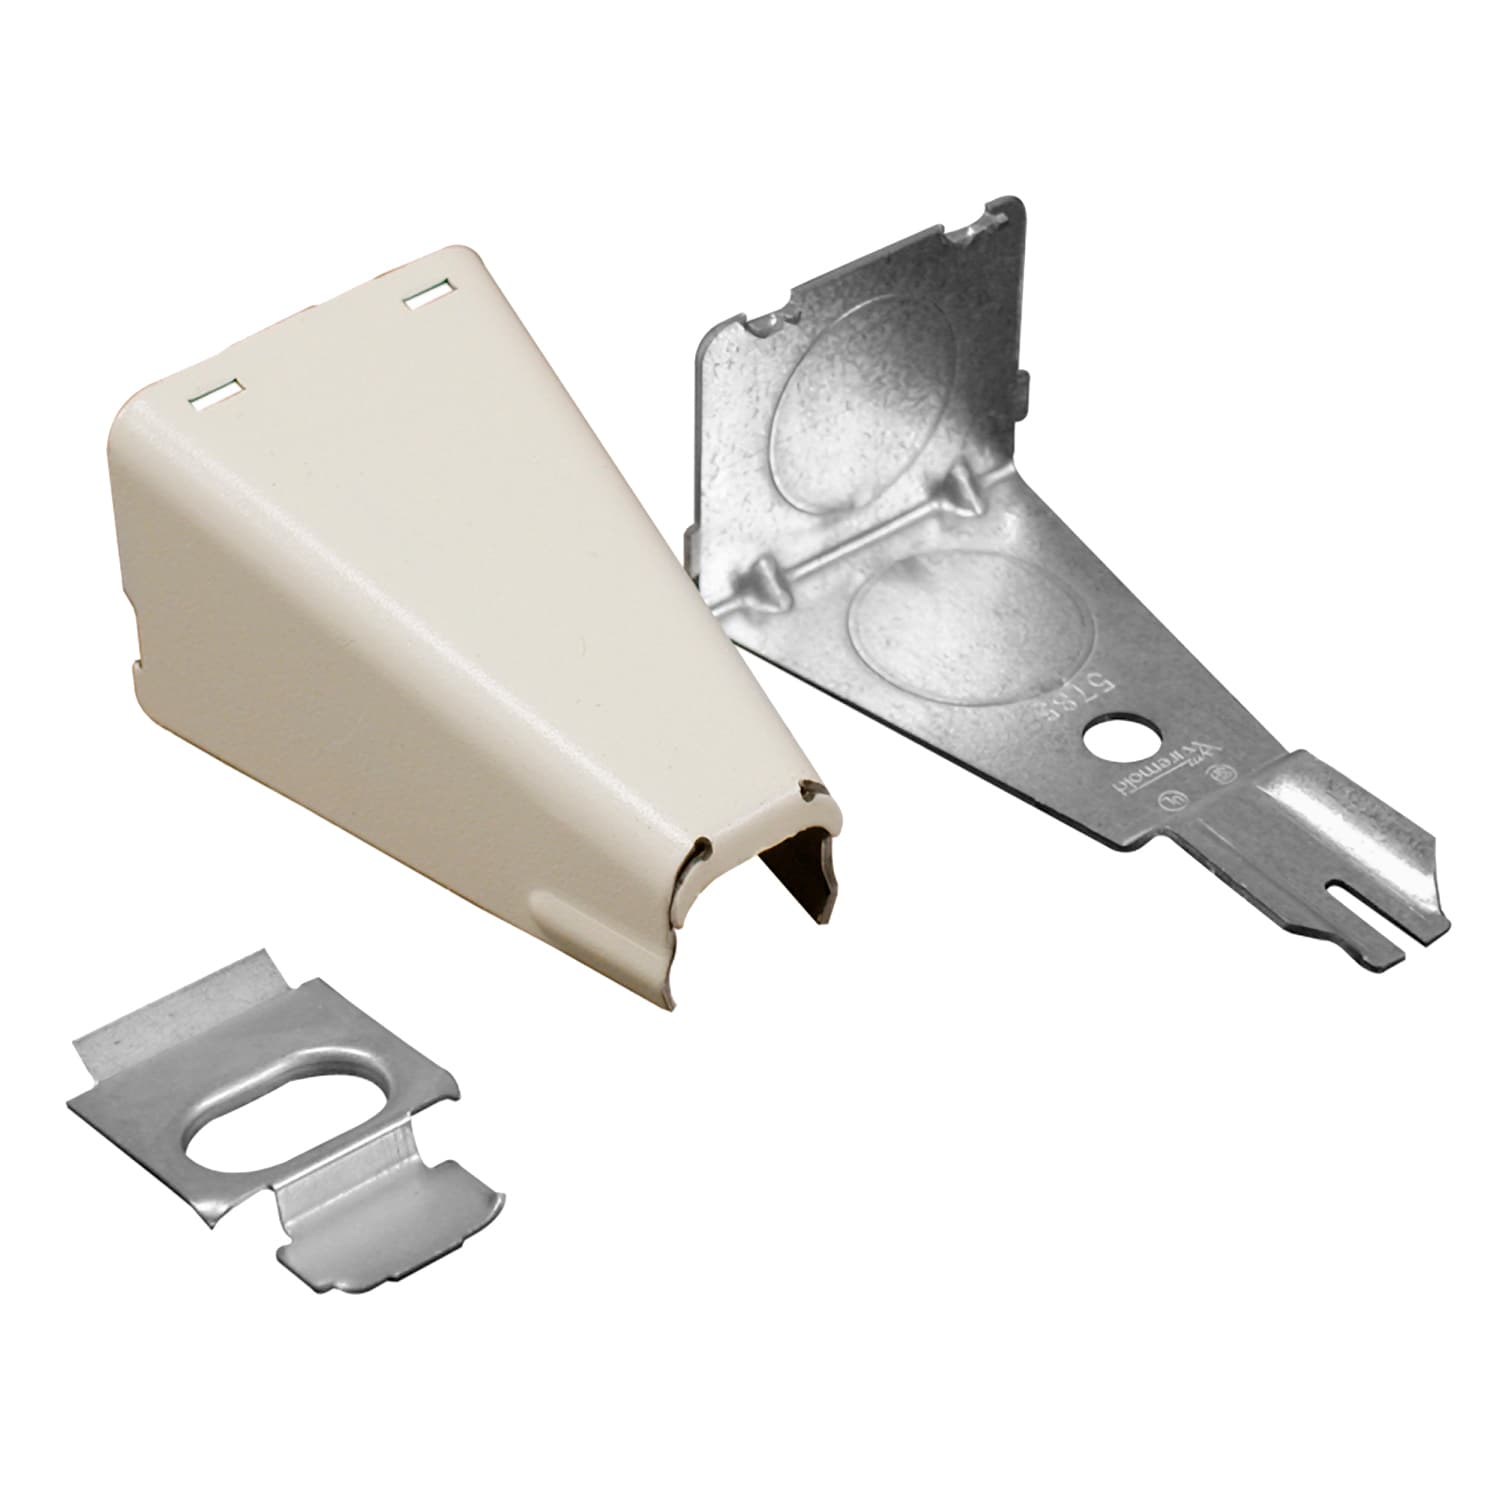 Wiremold 500/700 Series Single-Gang Switch and Receptacle Box Fitting, White, Steel, Raceway and Cord Covers